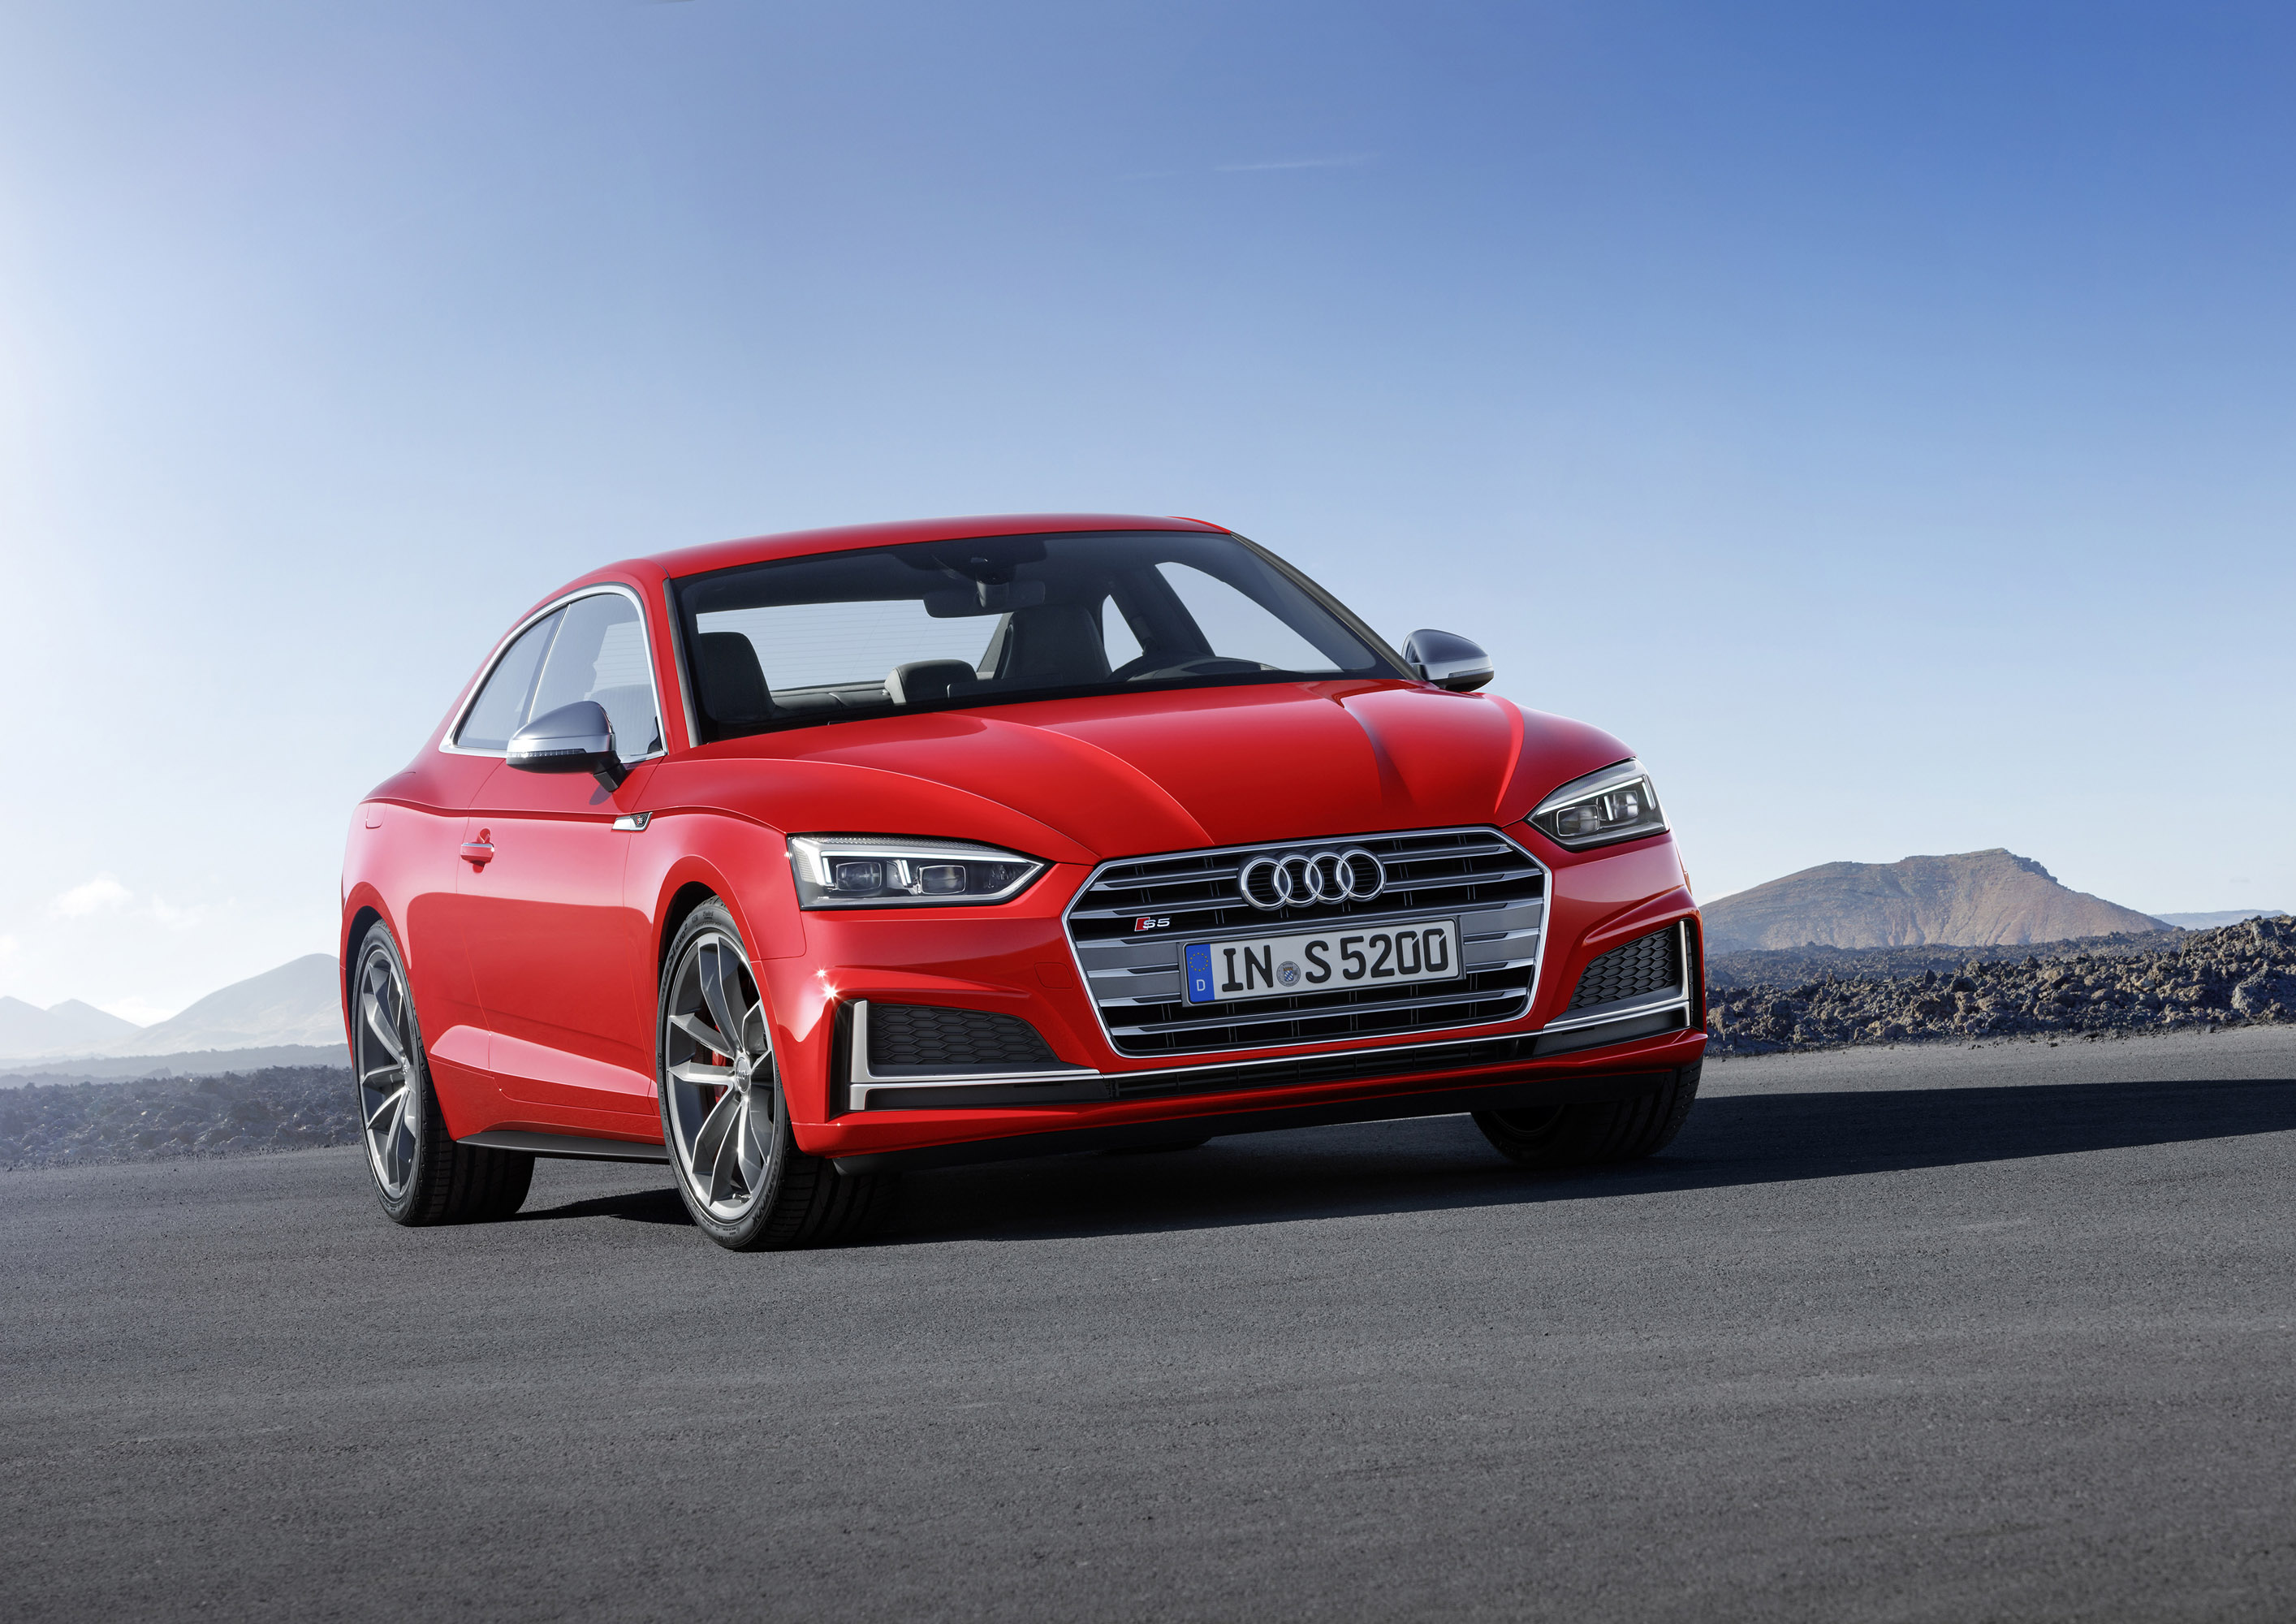 Audi A5 and S5 have just made their world premiere